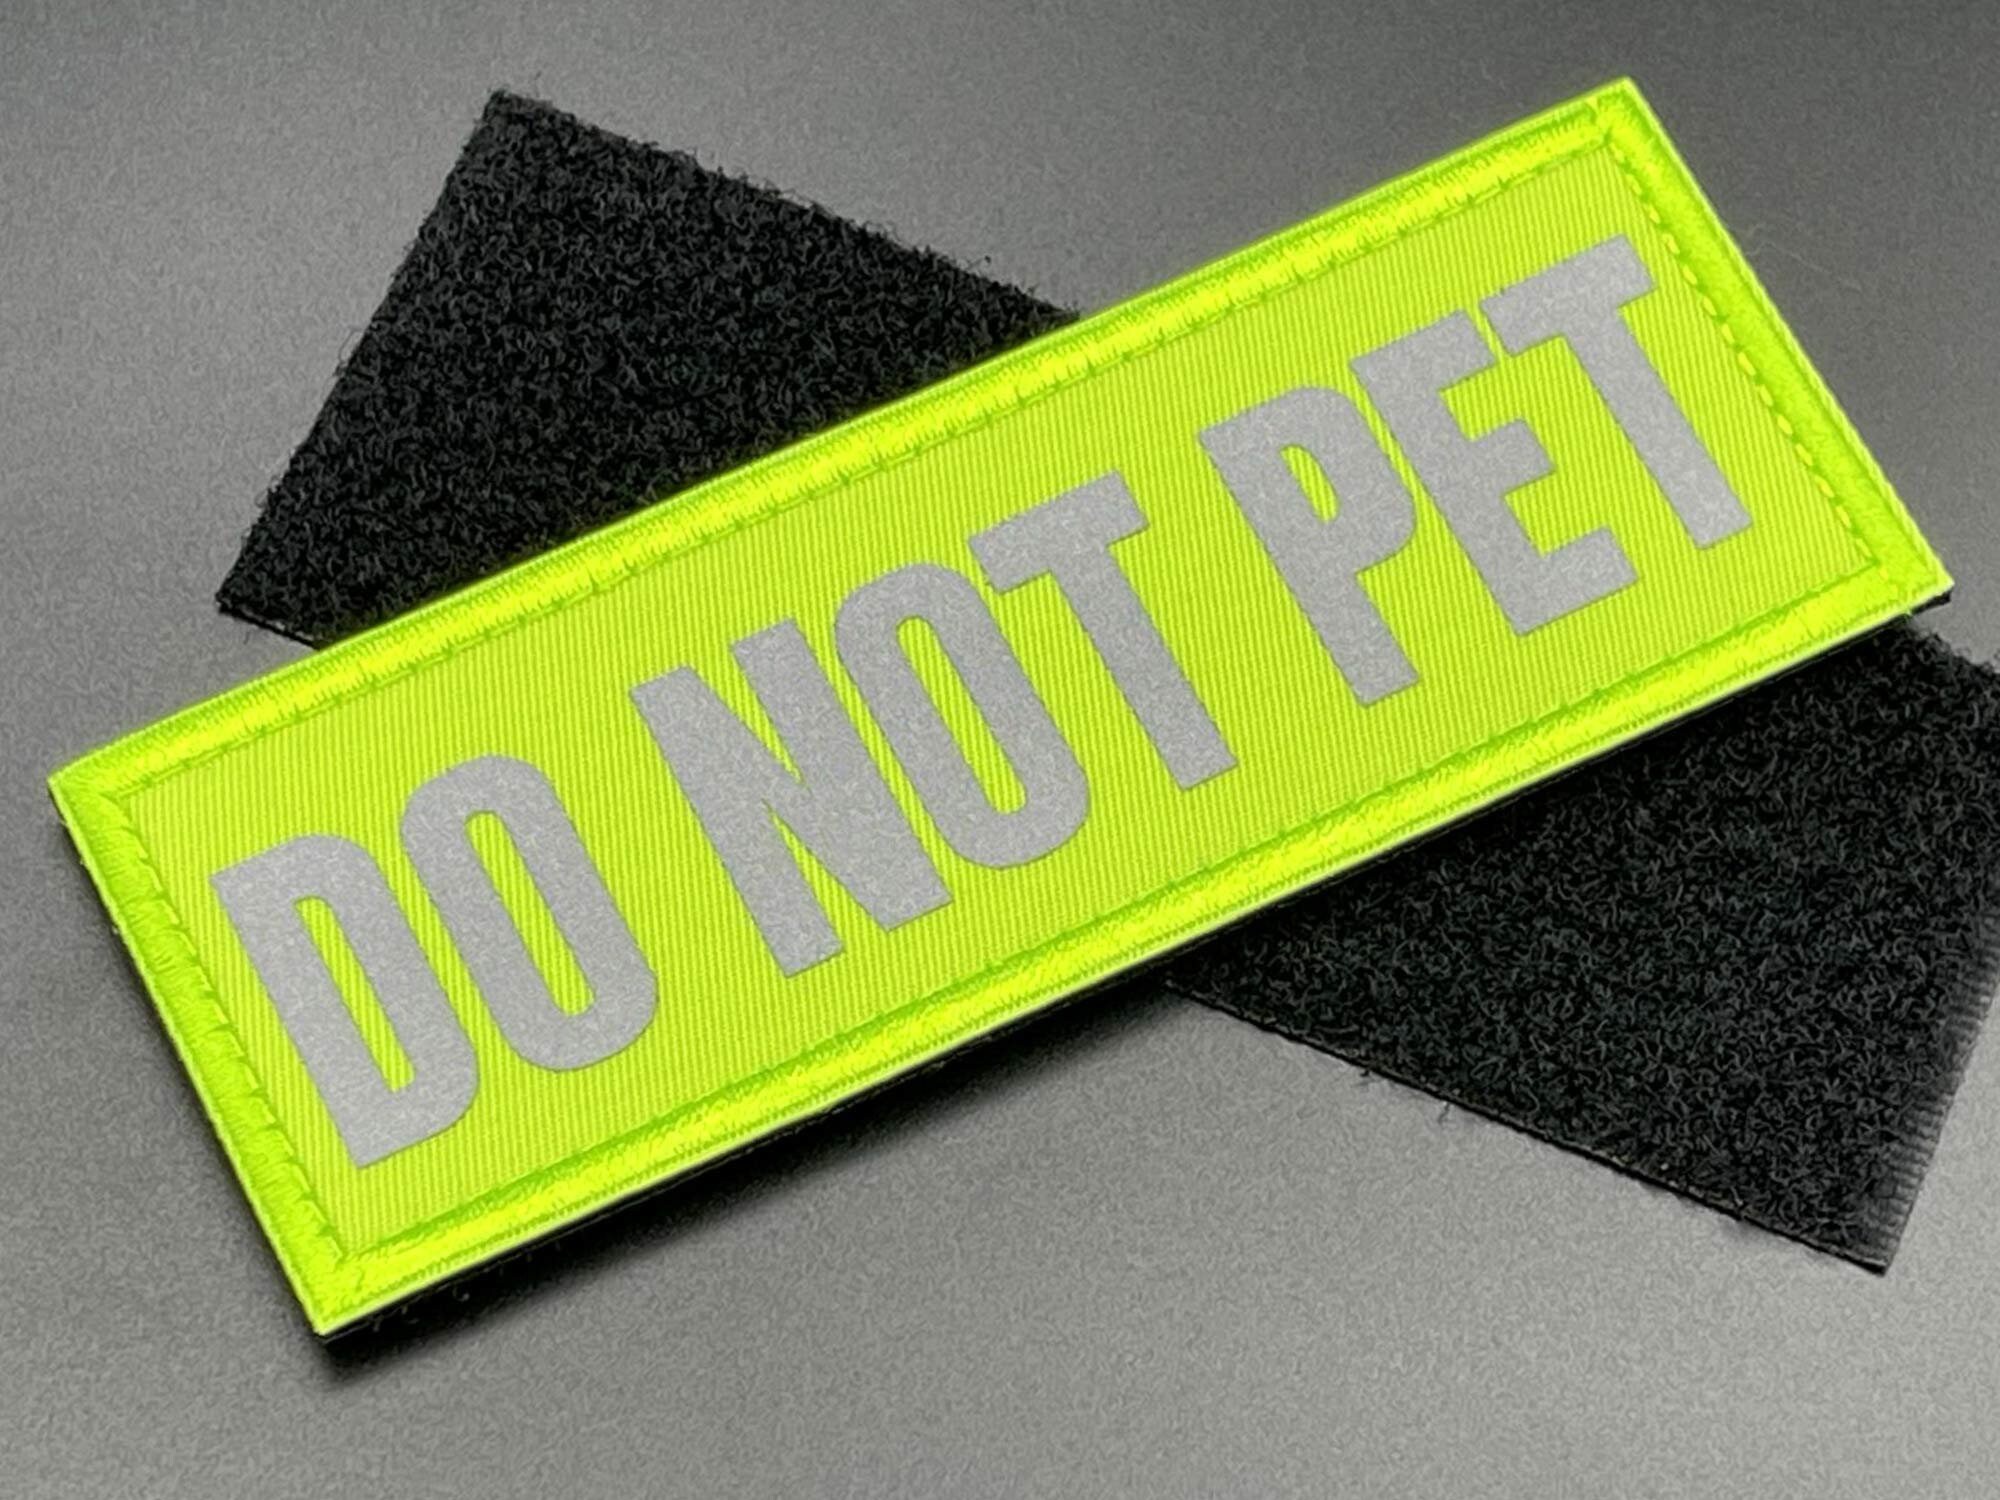 Do Not Pet Patch - Dog Harness Patches - Hi Vis Bright Green - Hook & Loop  or Sew On - Light Reflective - Animal Warning Sign Vest Badge